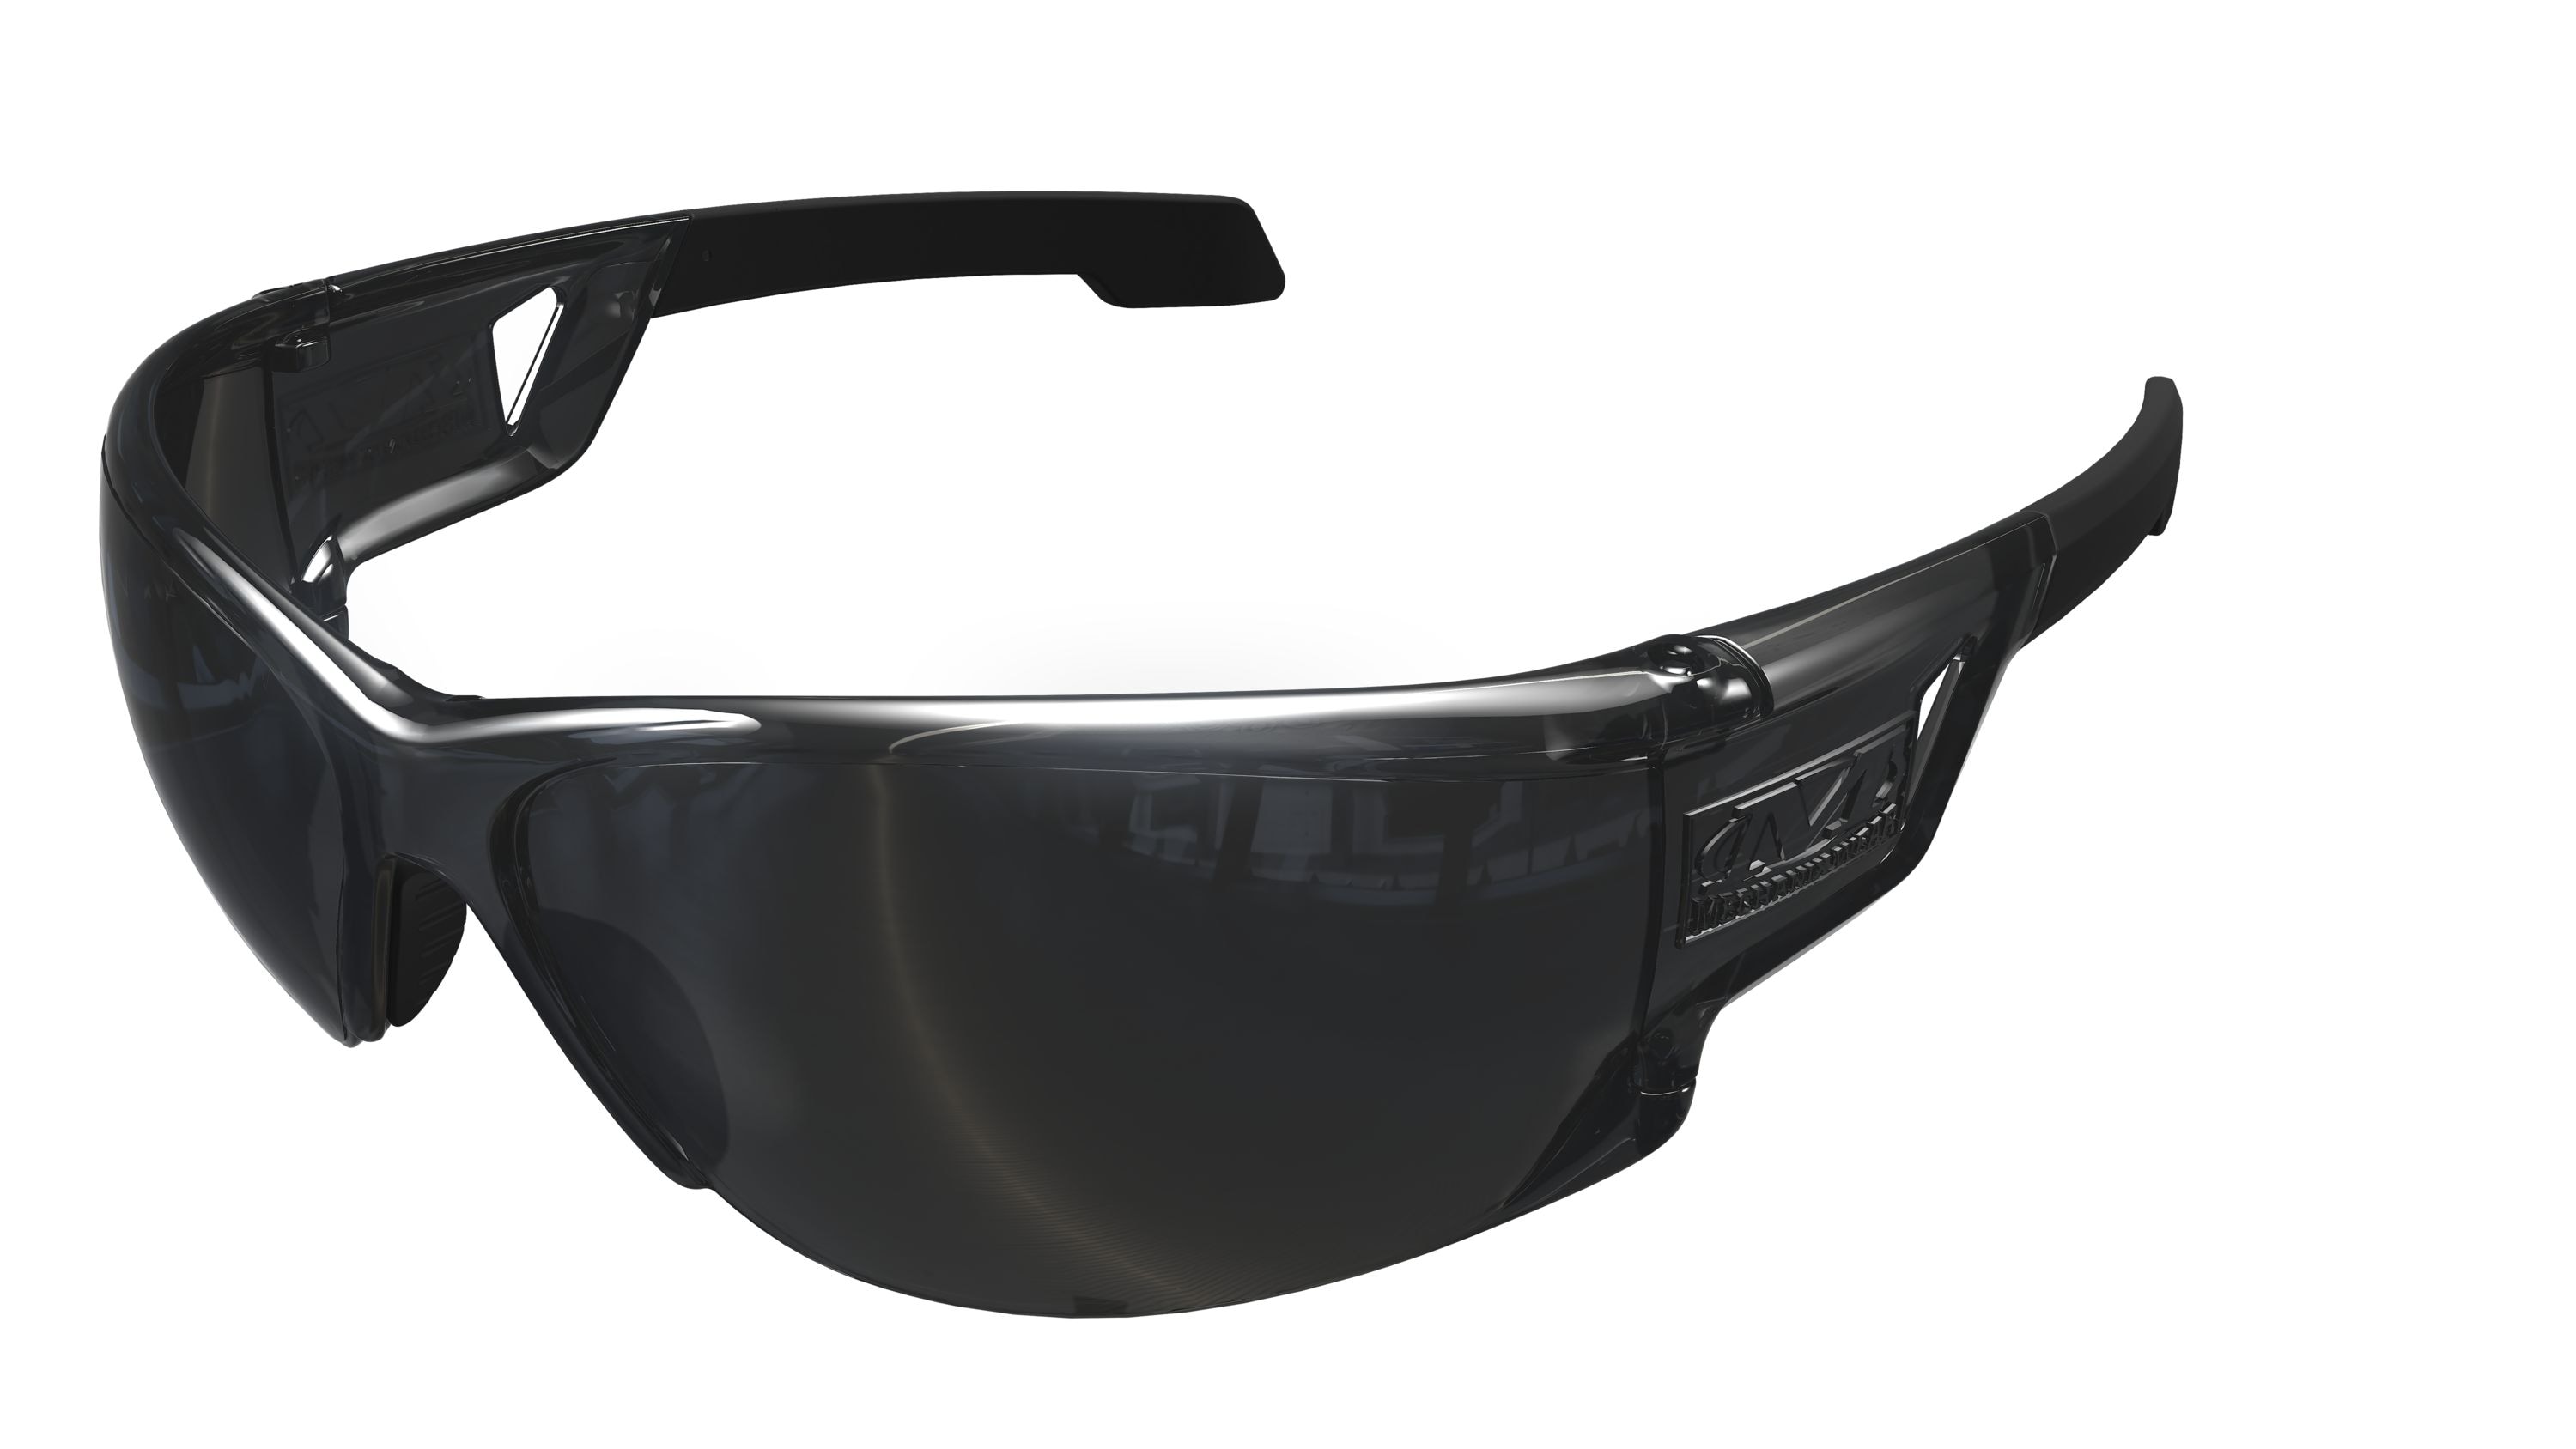 Crossfire 12120 Safety Glasses : : Tools & Home Improvement